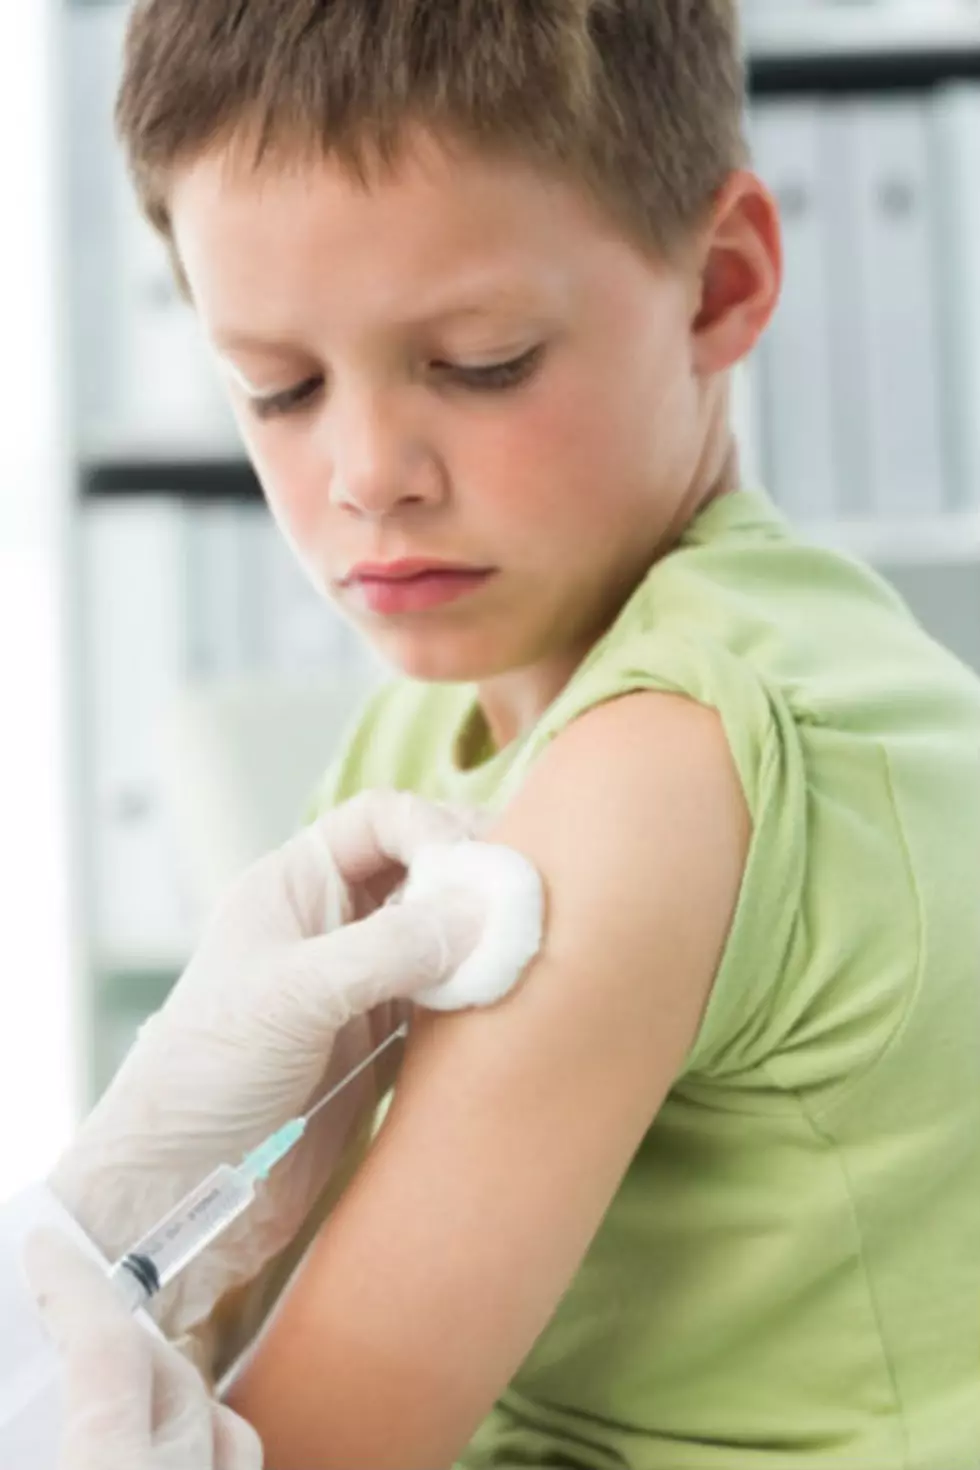 The Importance of Childhood Vaccines